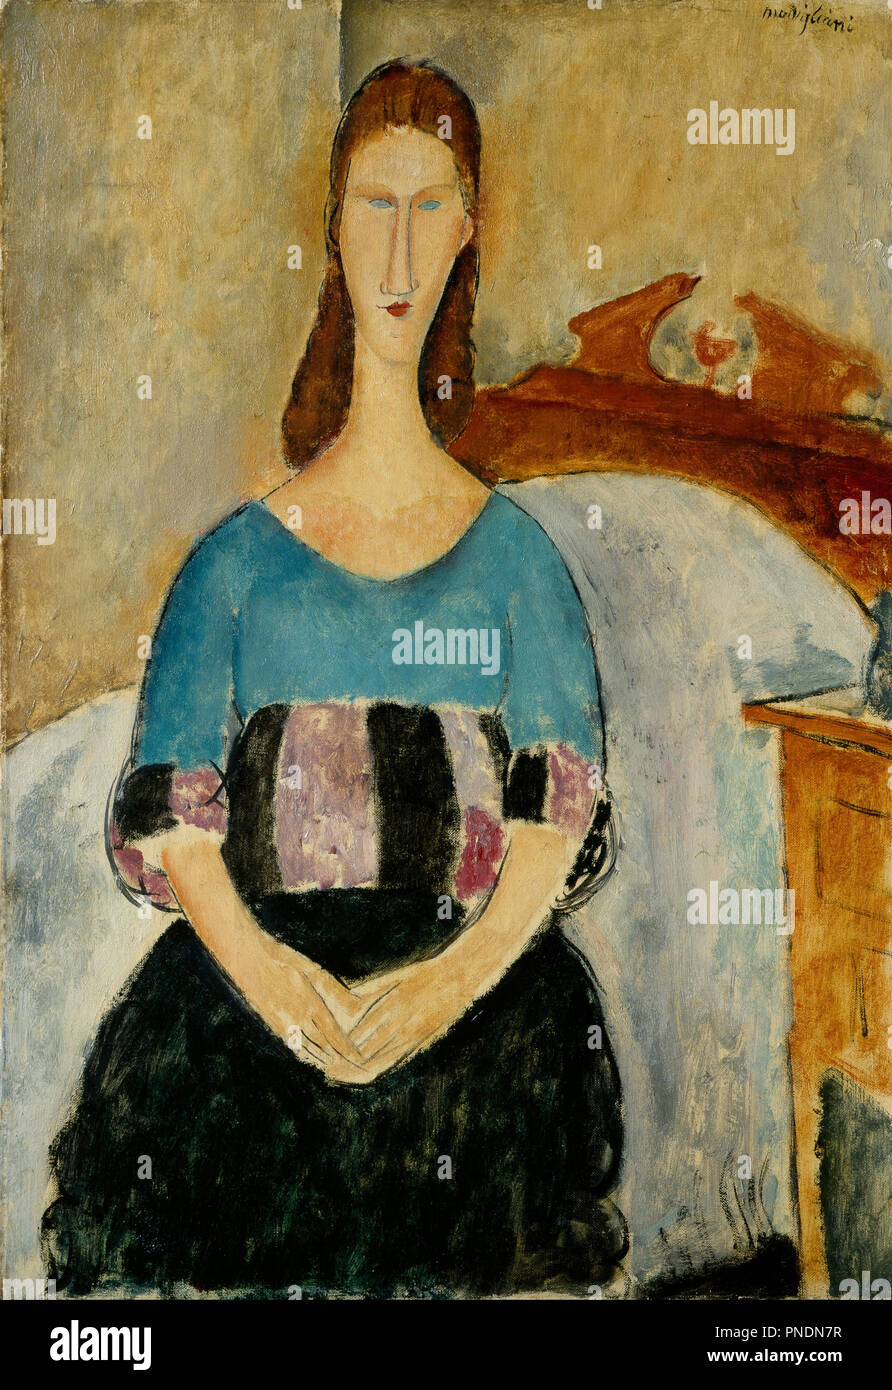 Portrait of Jeanne Hebuterne, Seated, 1918. Date/Period: 1918. Painting. Oil on canvas Oil on canvas. Height: 550 mm (21.65 in); Width: 380 mm (14.96 in). Author: Amedeo Modigliani. Stock Photo